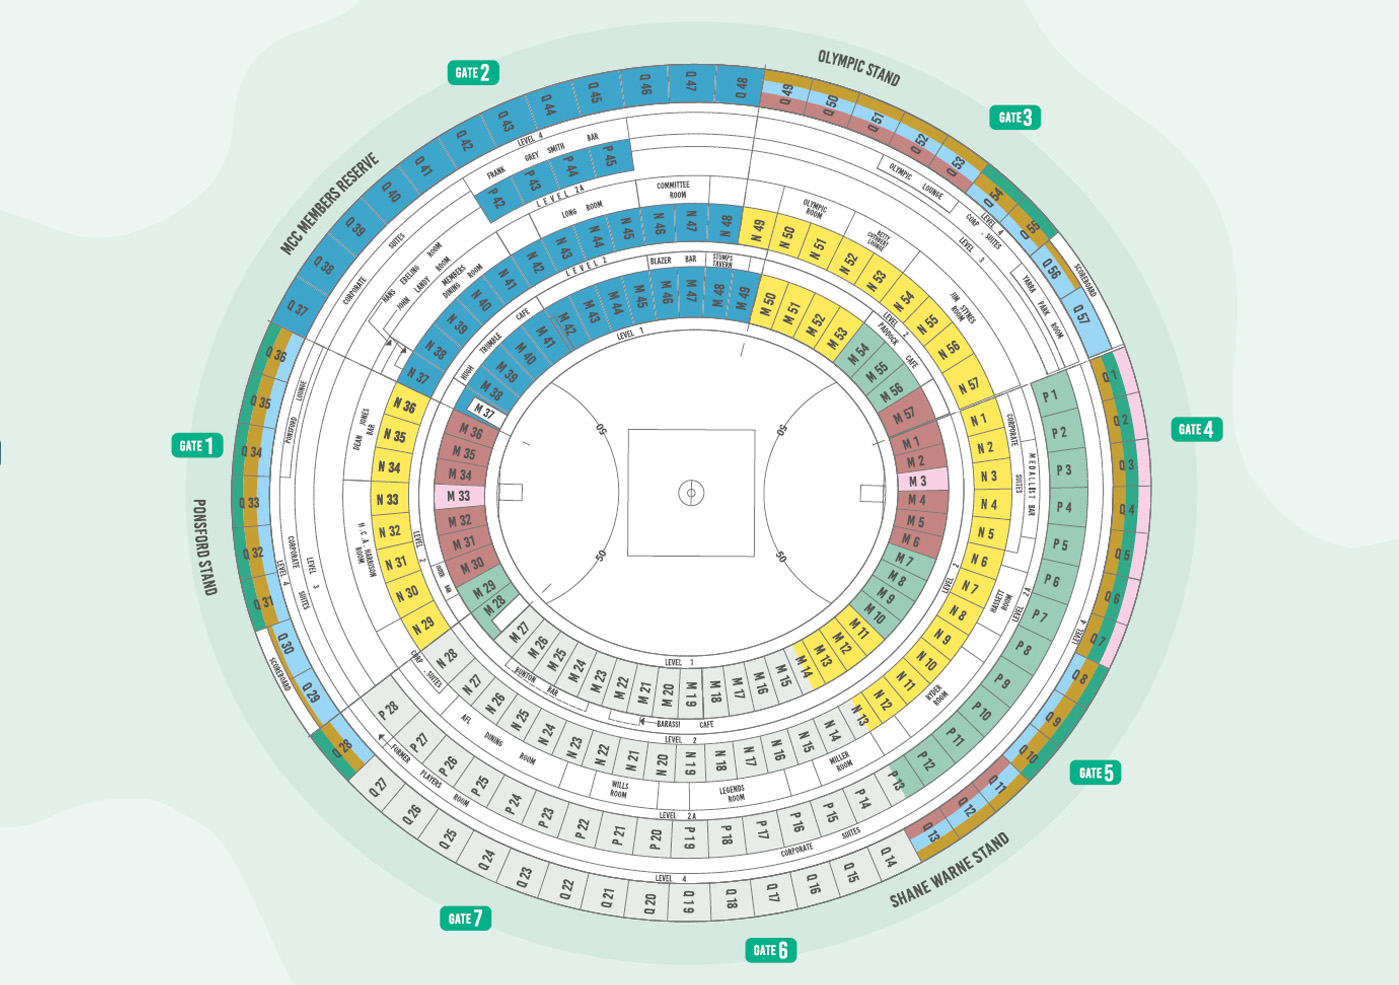 MCG Seating map for the 2022 AFL Grand Final